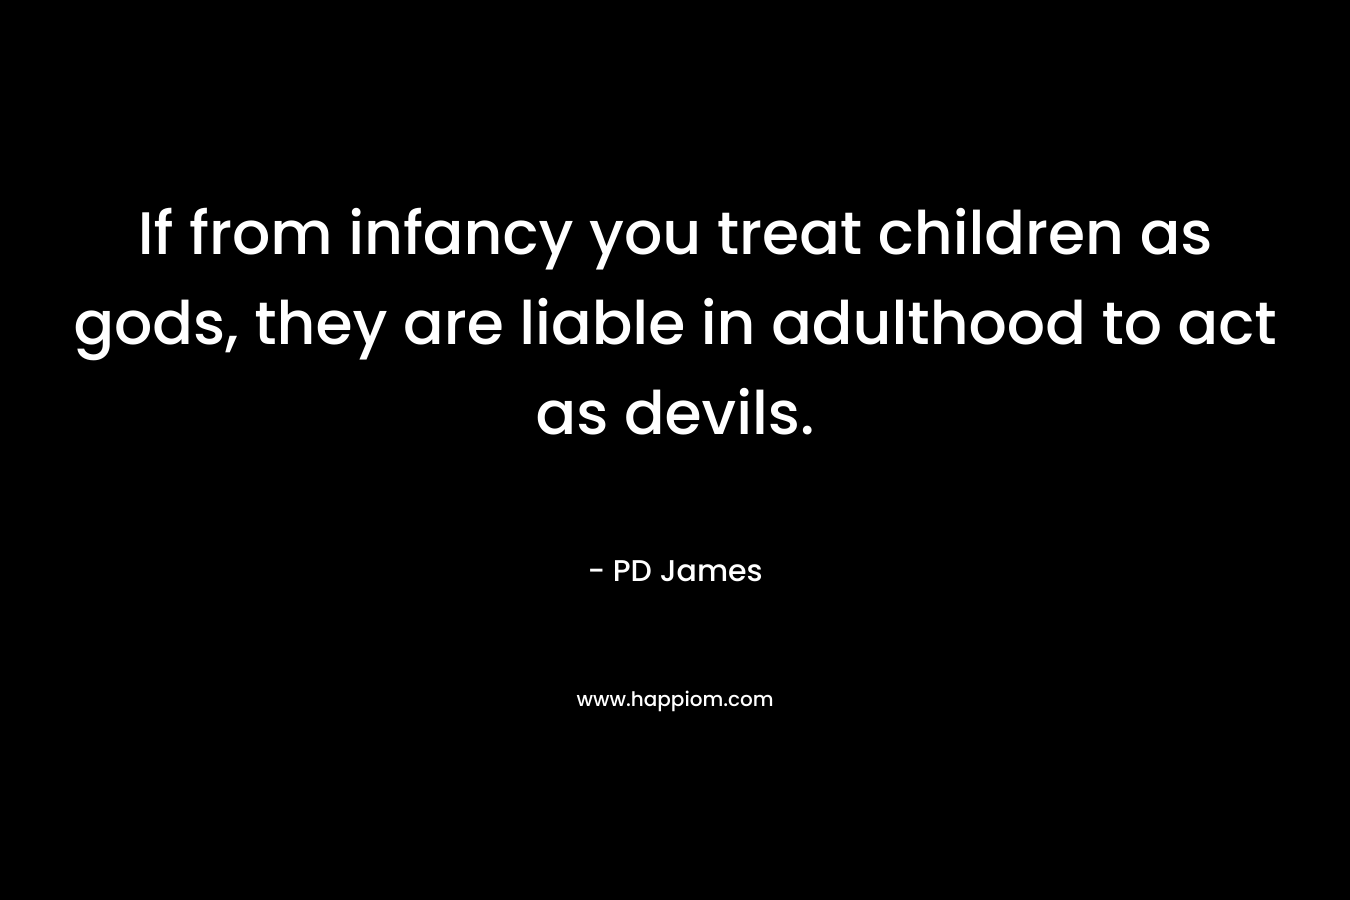 If from infancy you treat children as gods, they are liable in adulthood to act as devils. – PD James